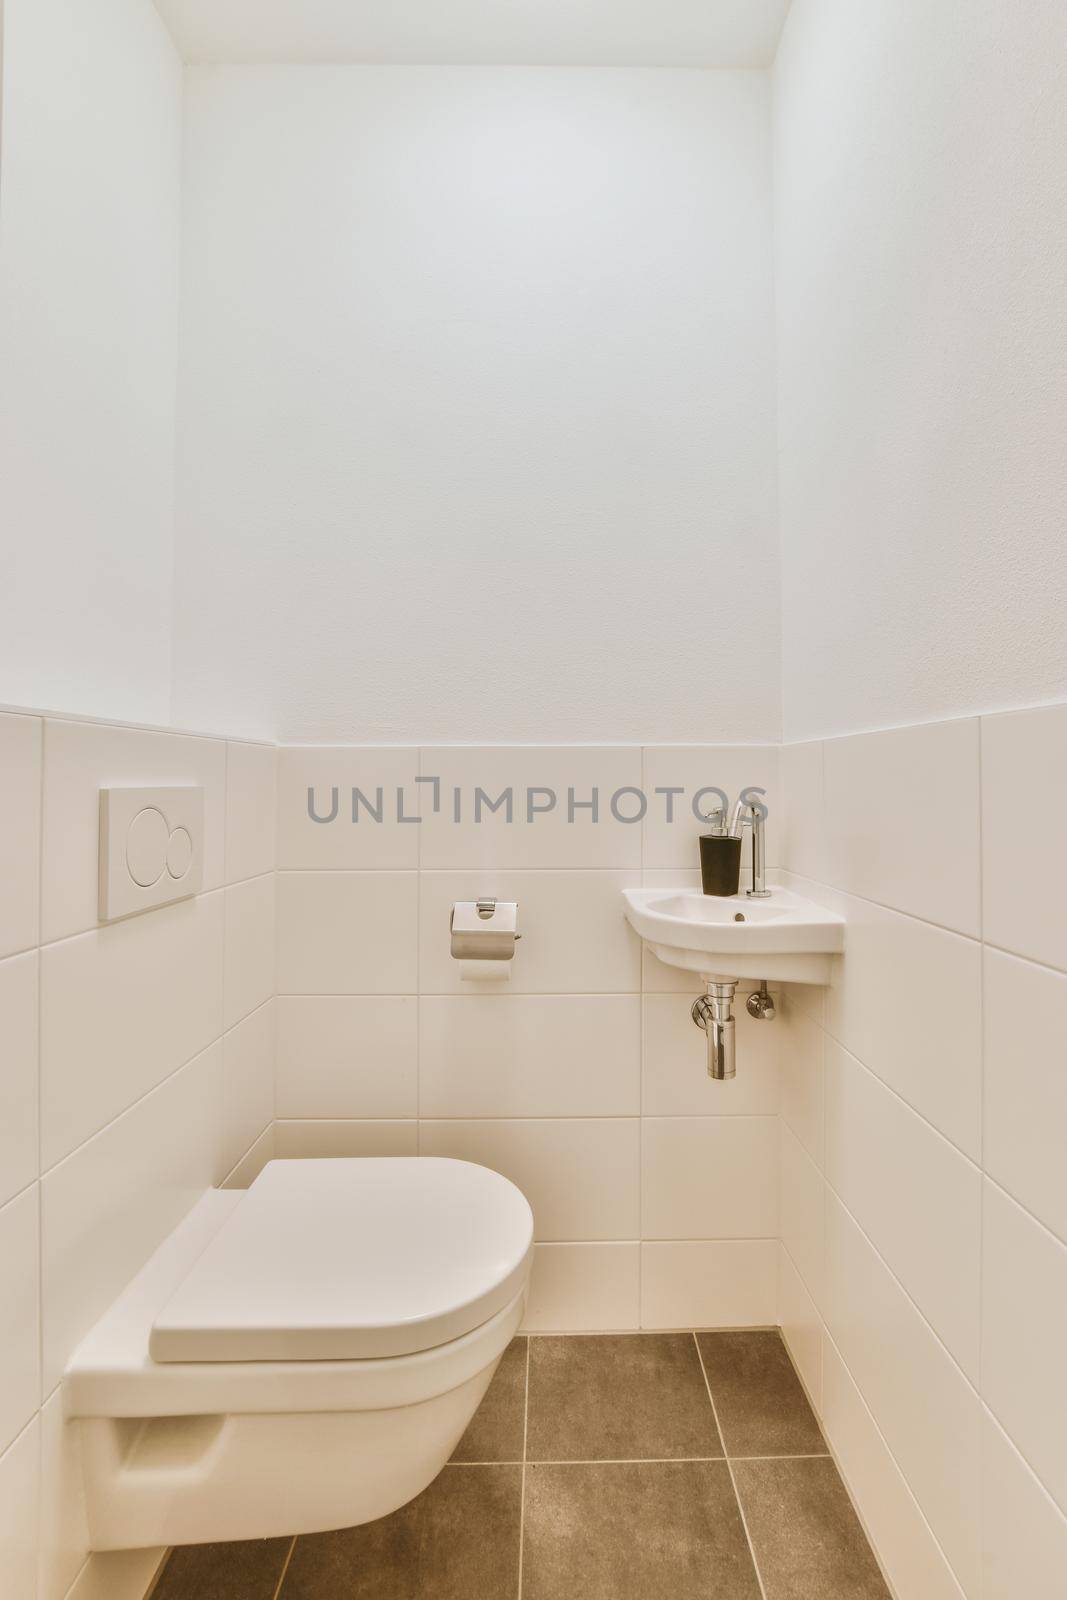 Stylish interior design of a bathroom with ceramic sink and toilet in a modern apartment